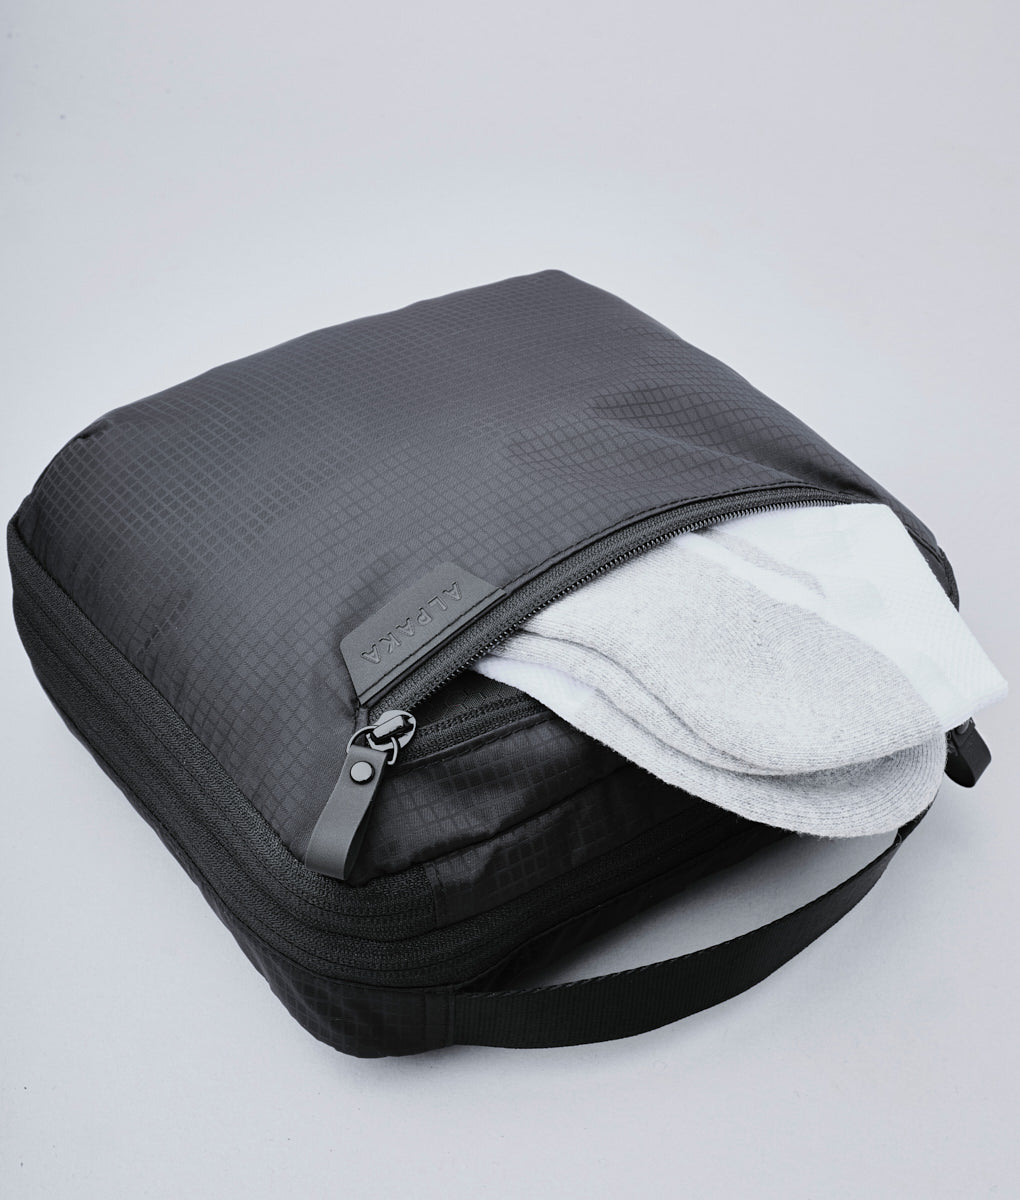 Travel Packing Cube